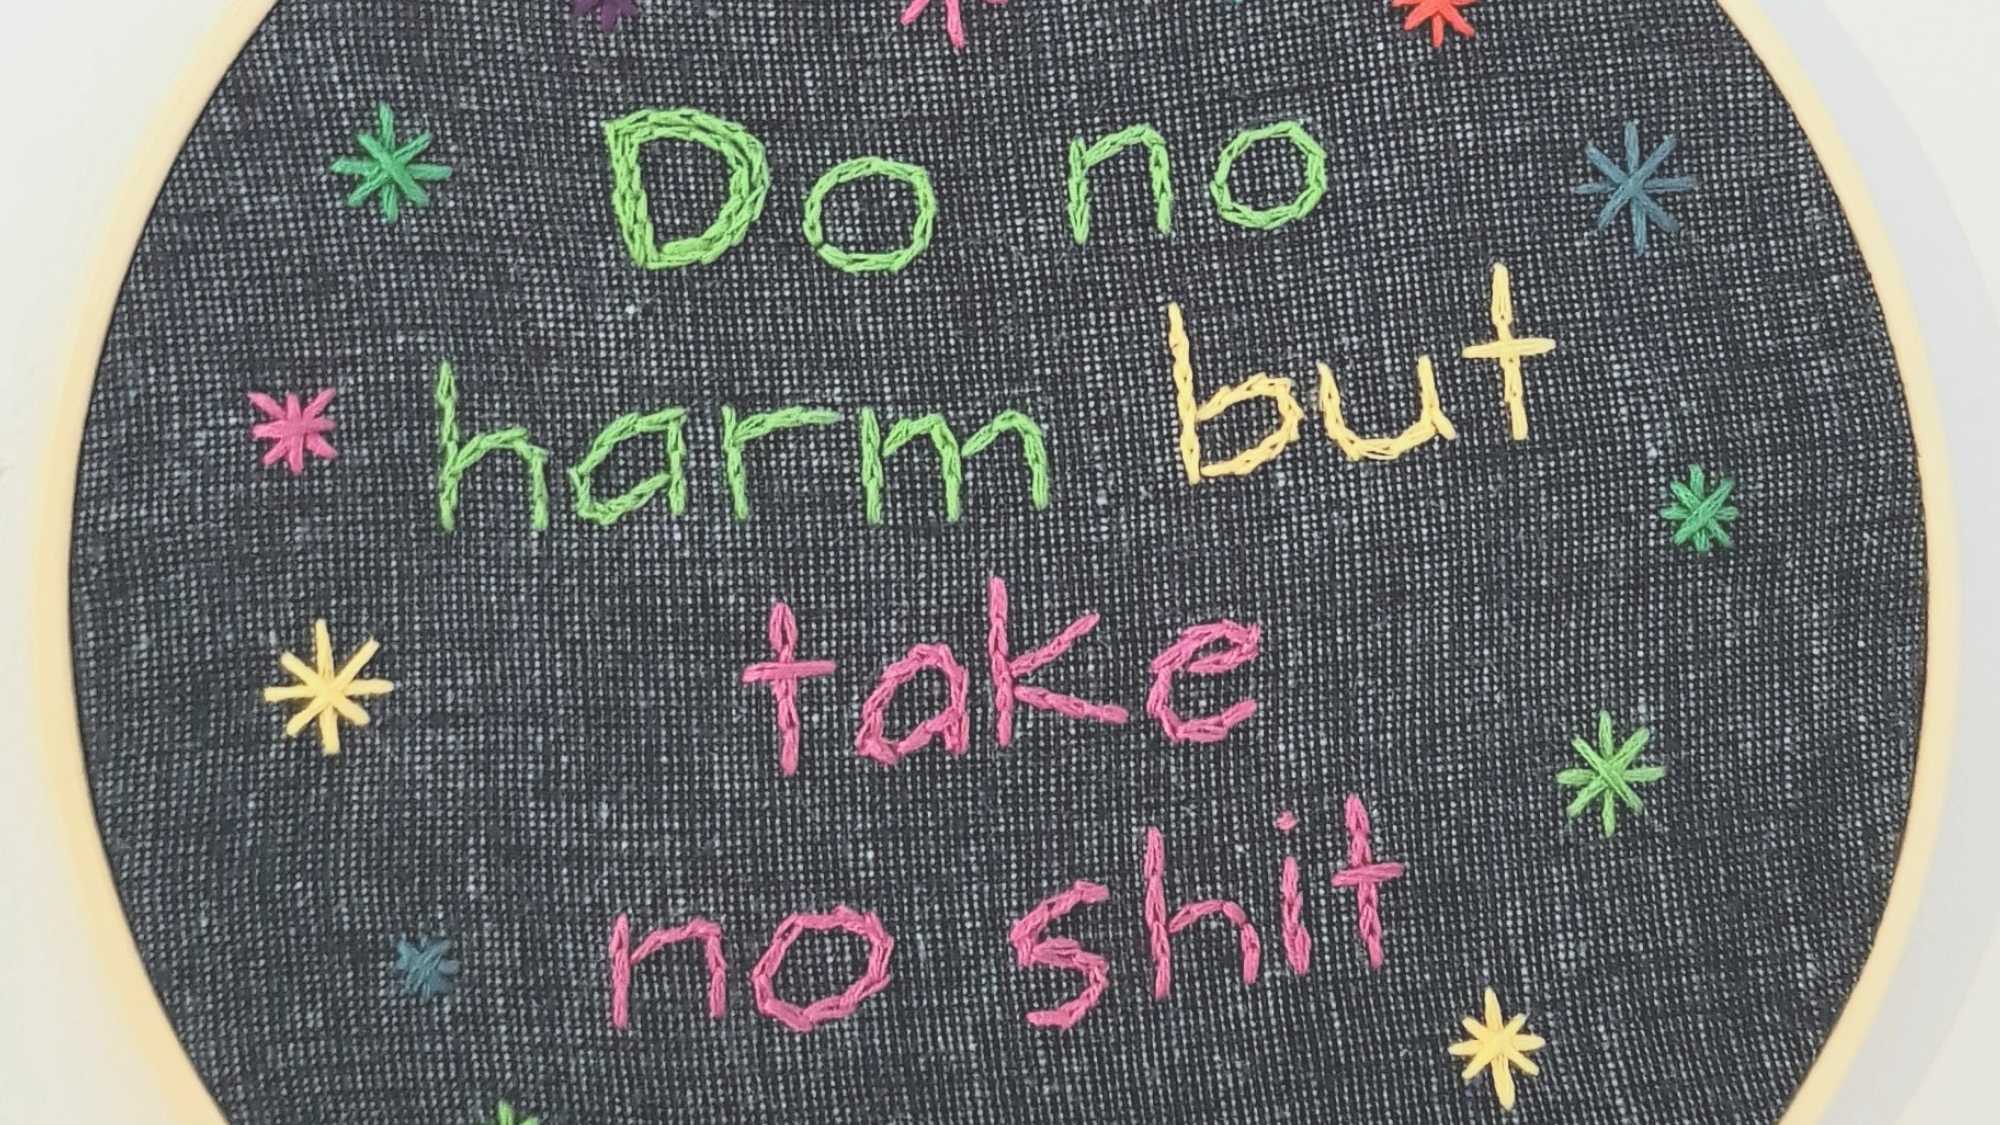 The word "Do no harm but take no shit" embroidered in green, yellow and pink on a dark background